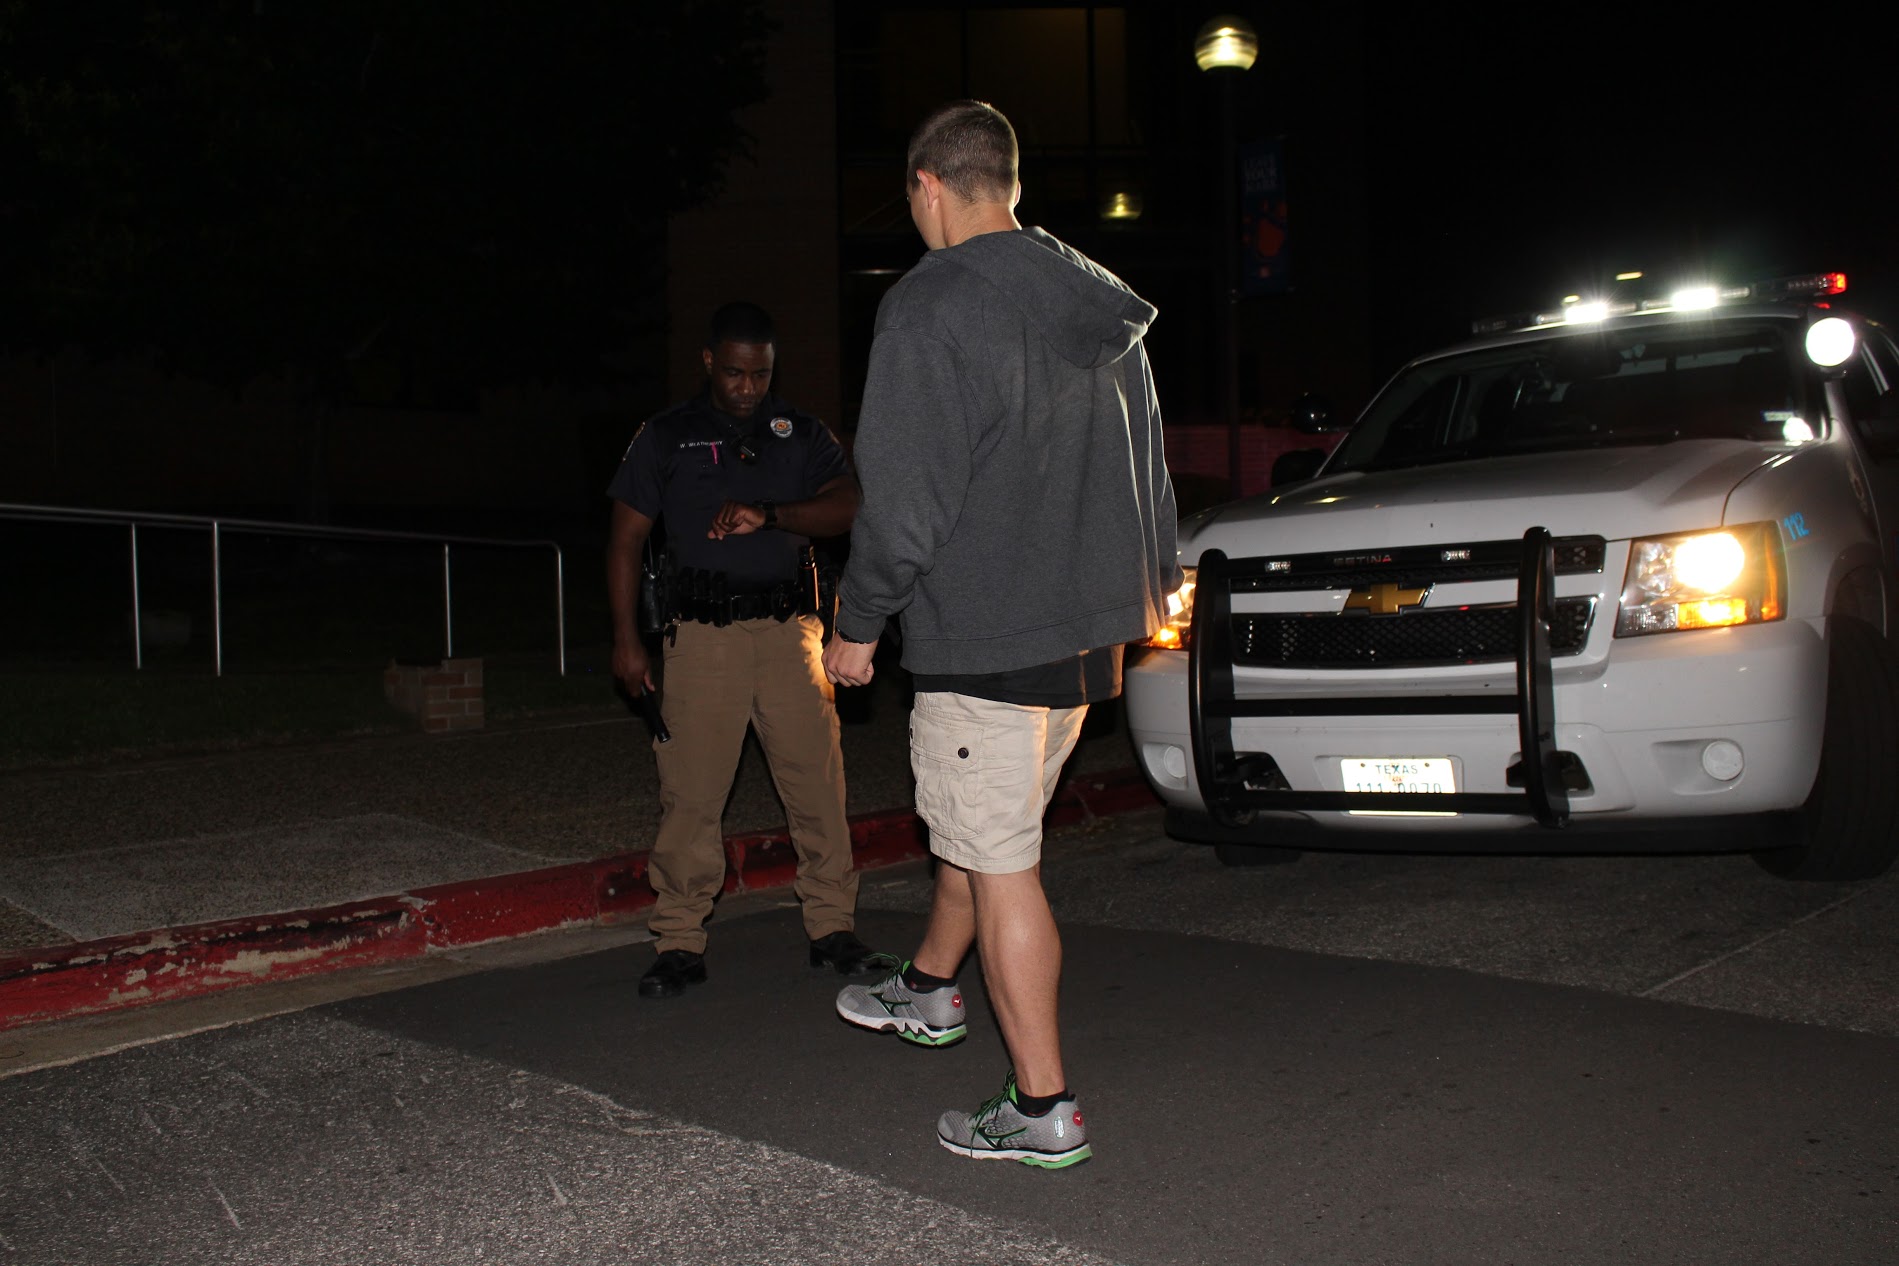 Officer conducts DWI test at night